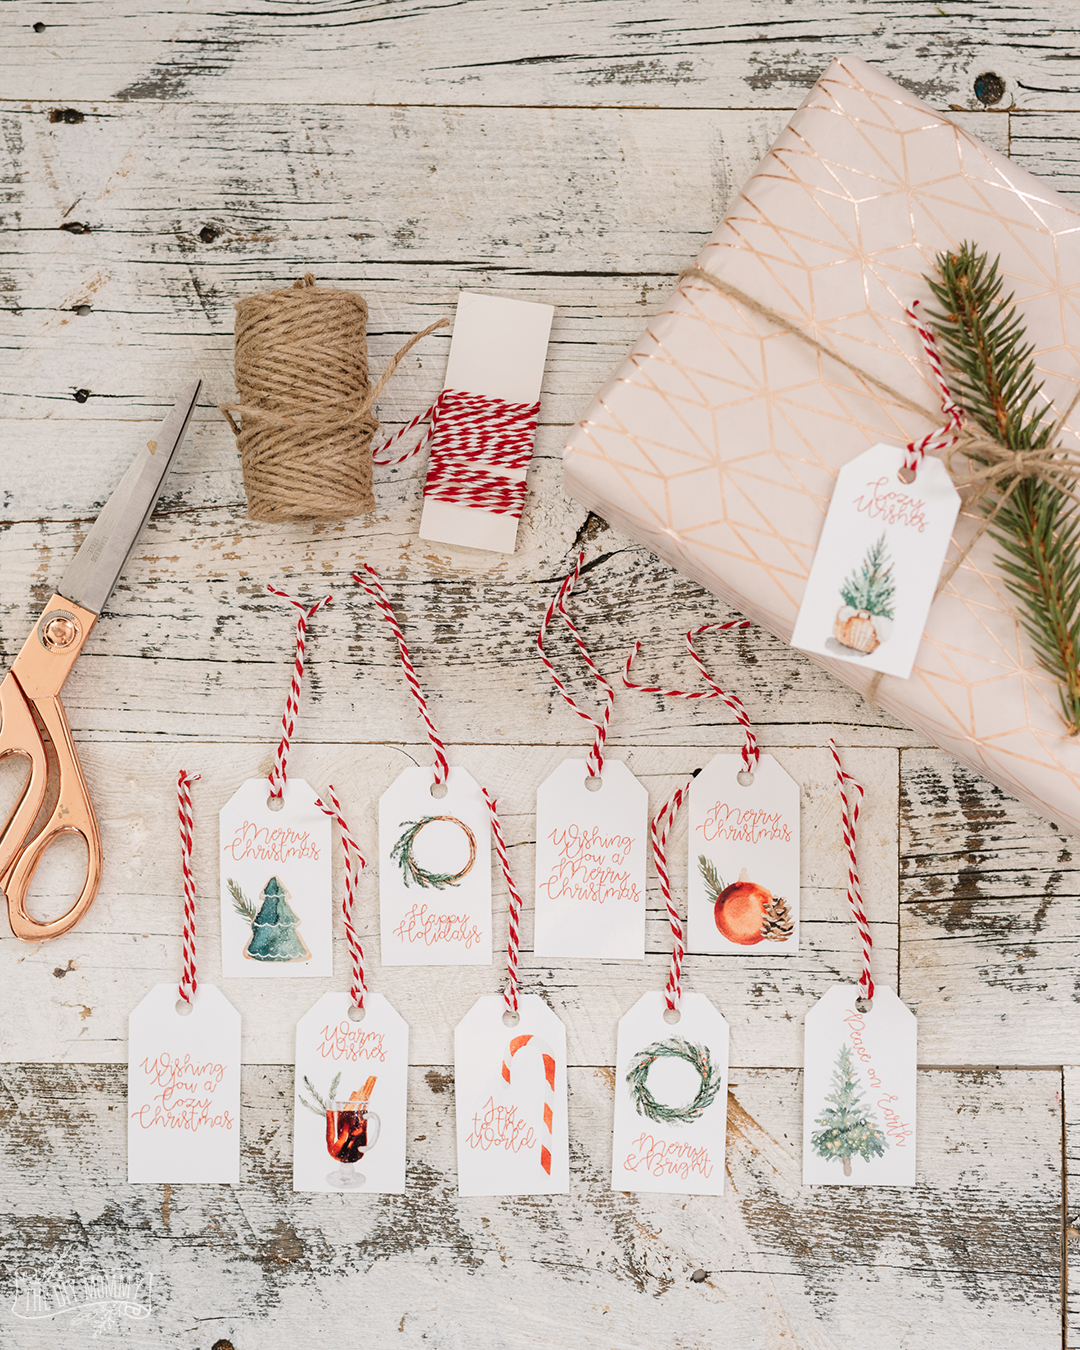 These gift tags are in classic colors of red and green and feature cozy Holiday images. Free printable!